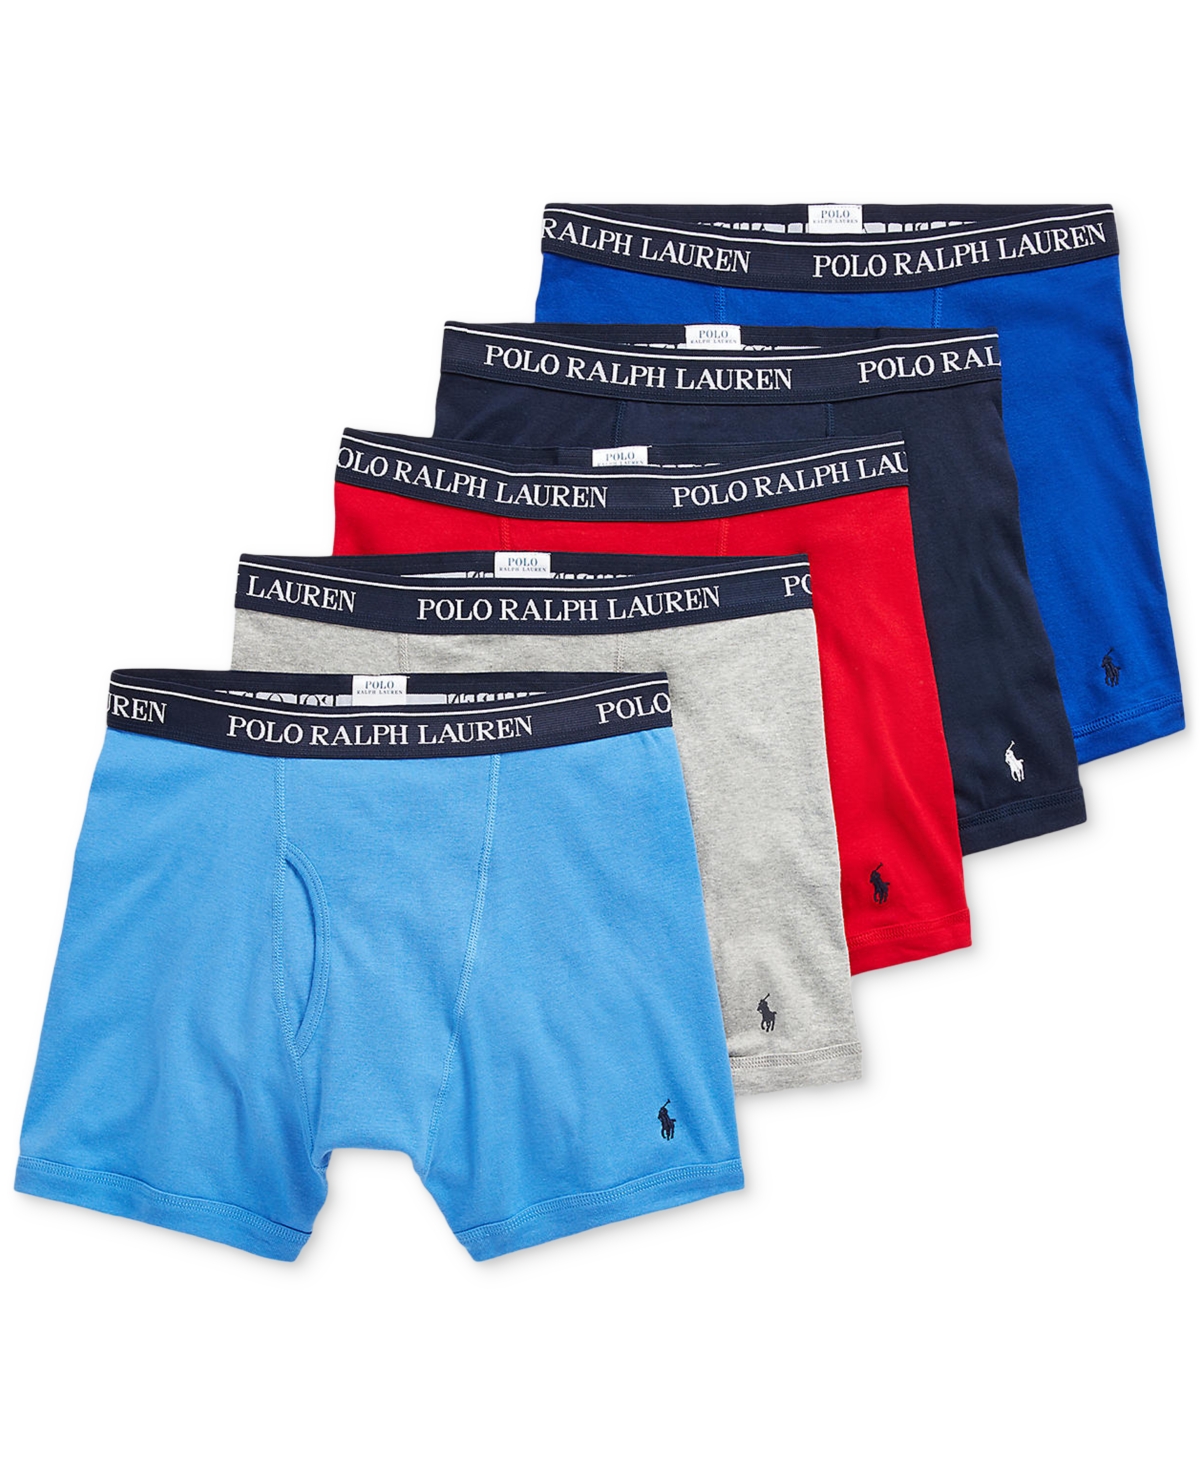 Polo Ralph Lauren Men's 5-pack Classic Cotton Boxer Briefs In Andover,aerial Blue,rugby Royal,rl